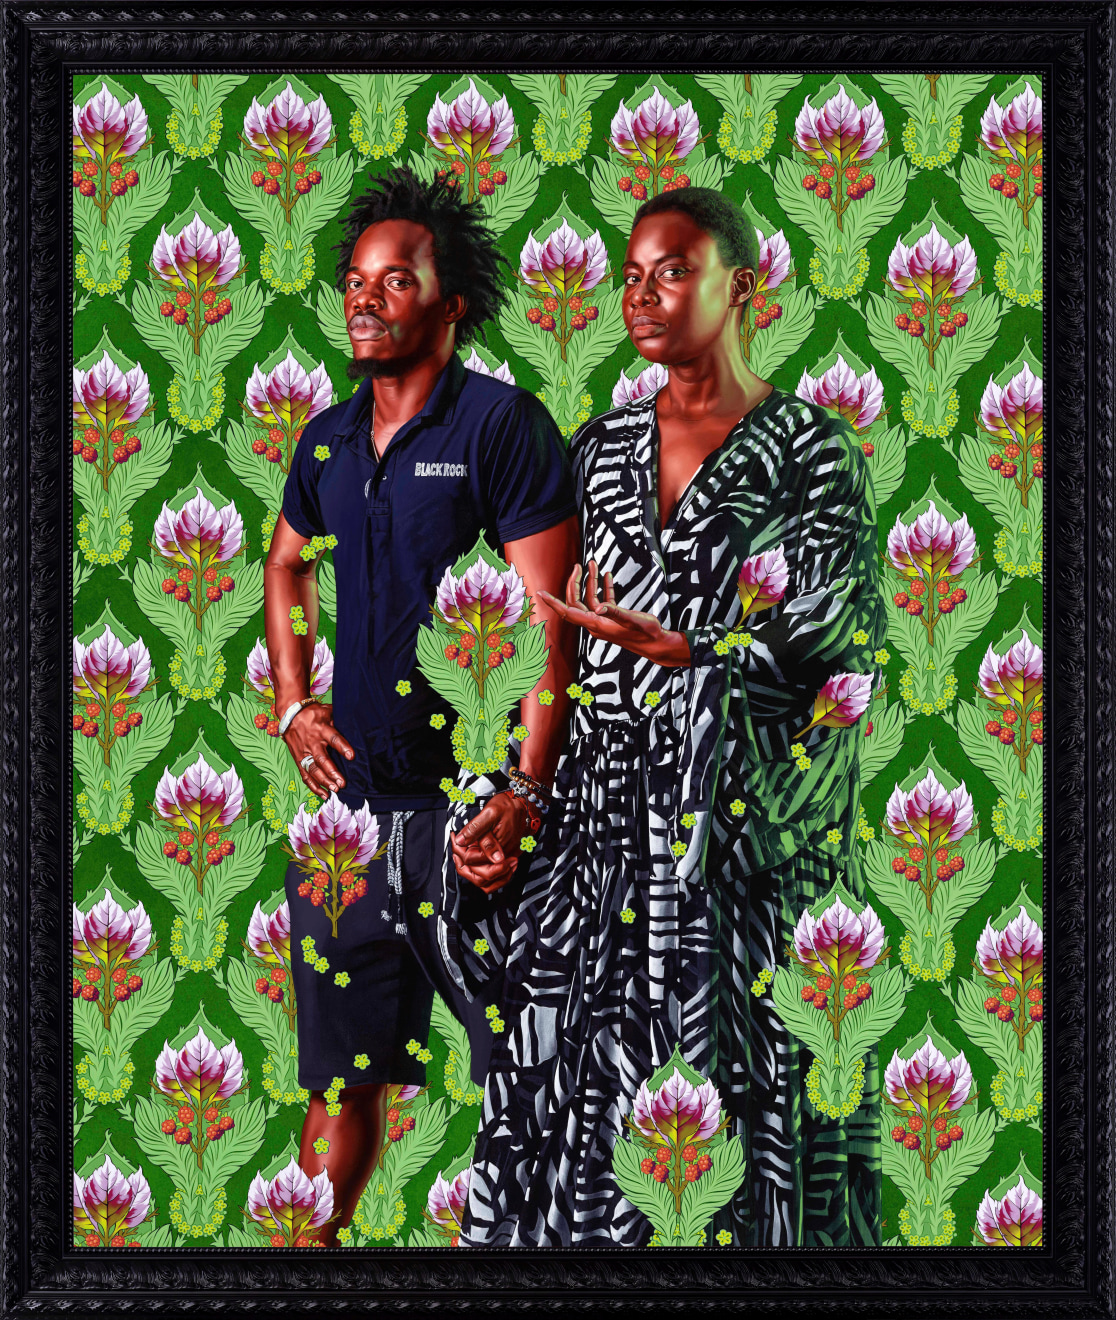 KEHINDE WILEY, Portrait of M&rsquo;baye Babacar N&rsquo;Diaye Sarr and Sarah Diouf, 2020, oil on linen, painting: 72 x 60 inches (182.9 x 152.4 cm), framed: 83 7/16 x 71 11/16 inches (211.9 x 182.1 cm), KW-PA-20-005